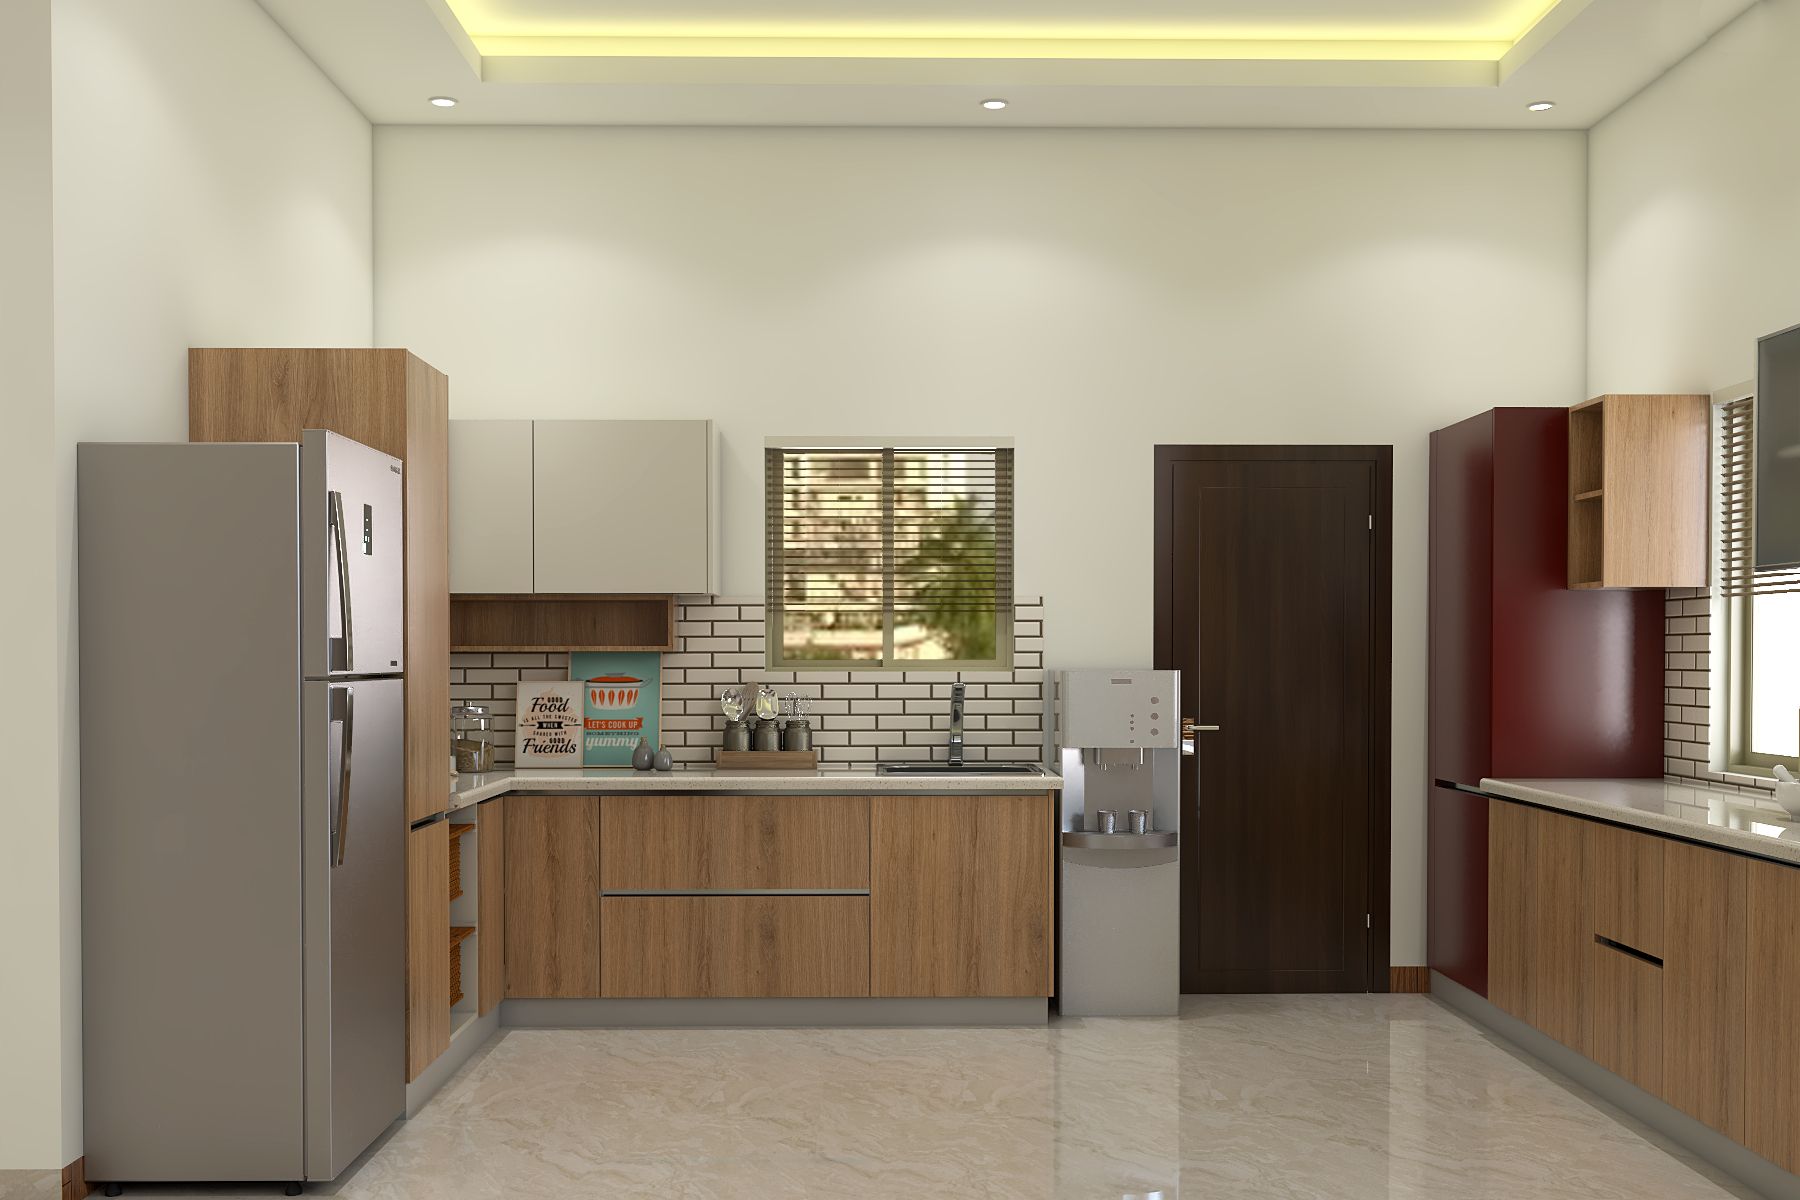 Modular Spacious Wooden Kitchen Design With Wooden Cabinets